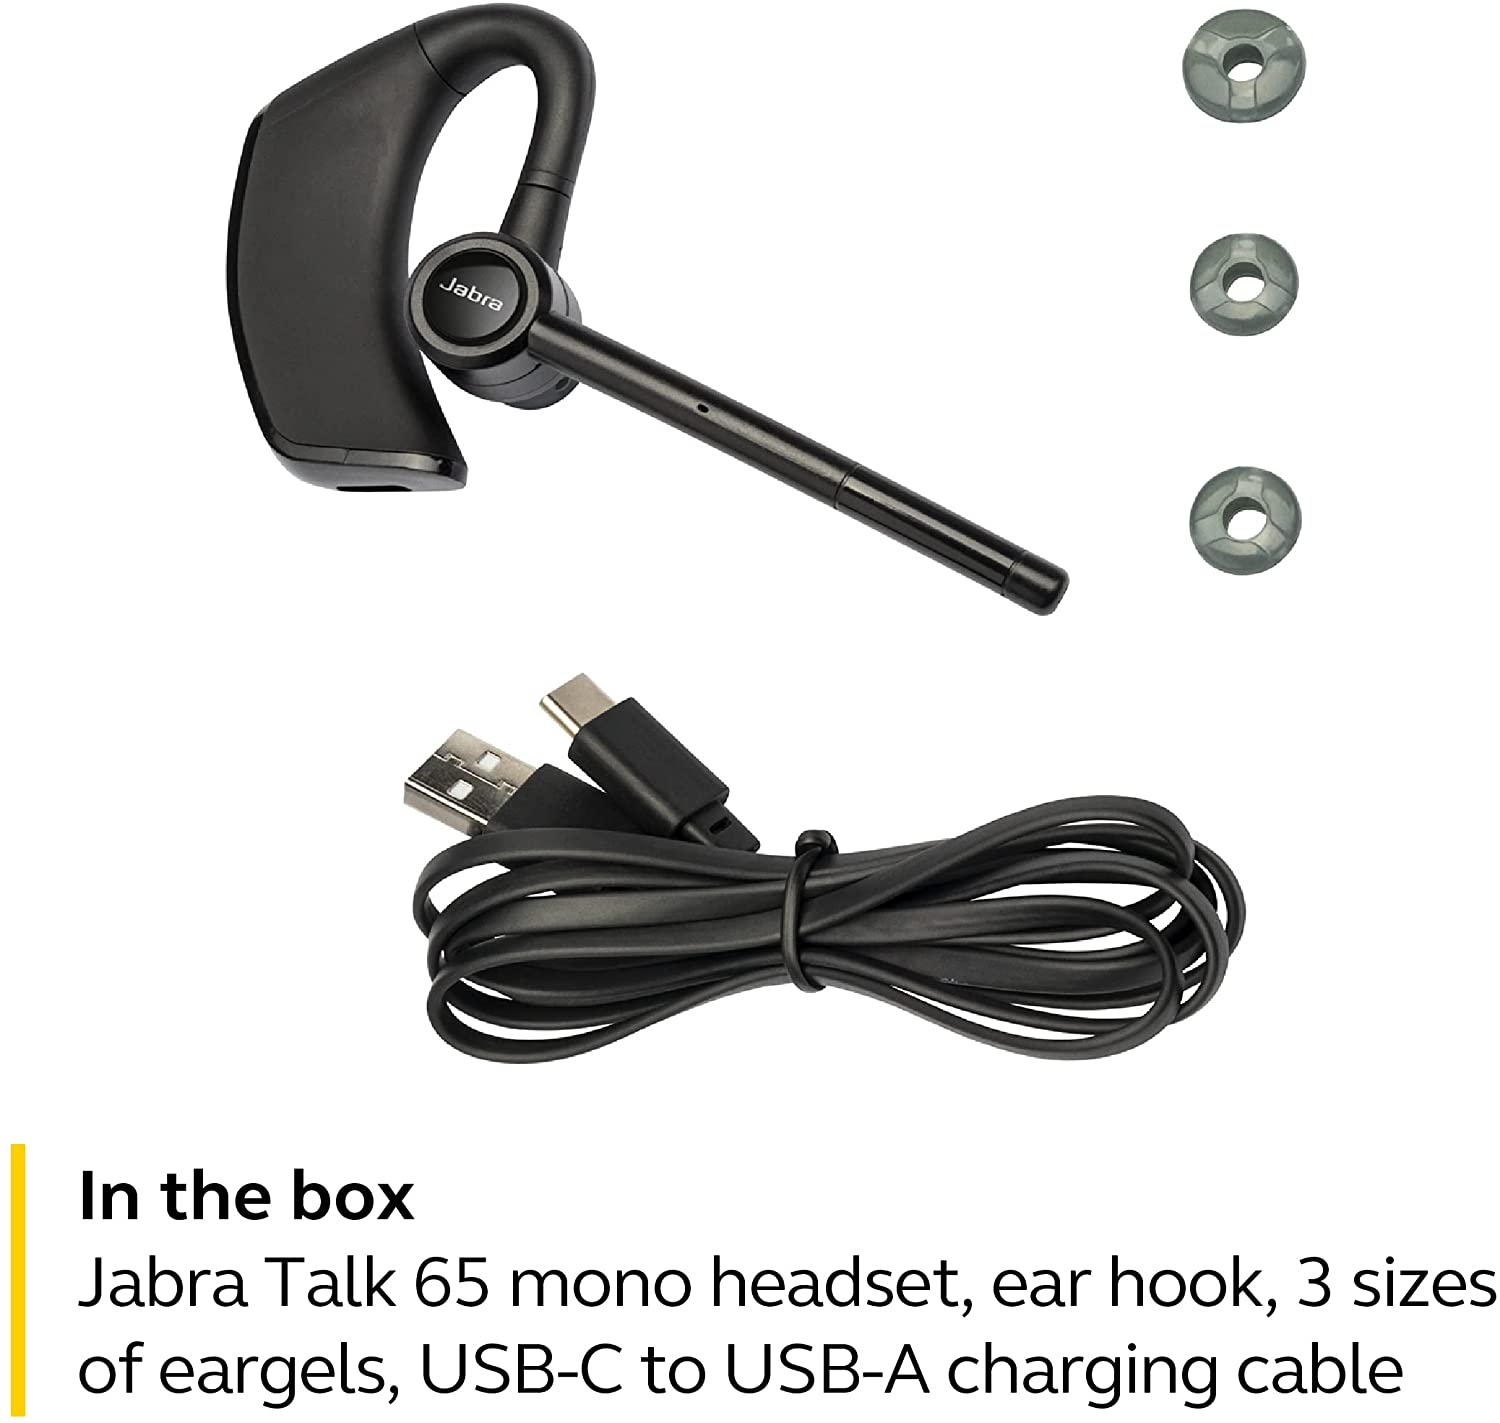 Jabra Talk 65 Mono Bluetooth Headset -2 Built-in Noise Cancelling Microphones Suppress 80% of Background Noise for Clearer Conversations